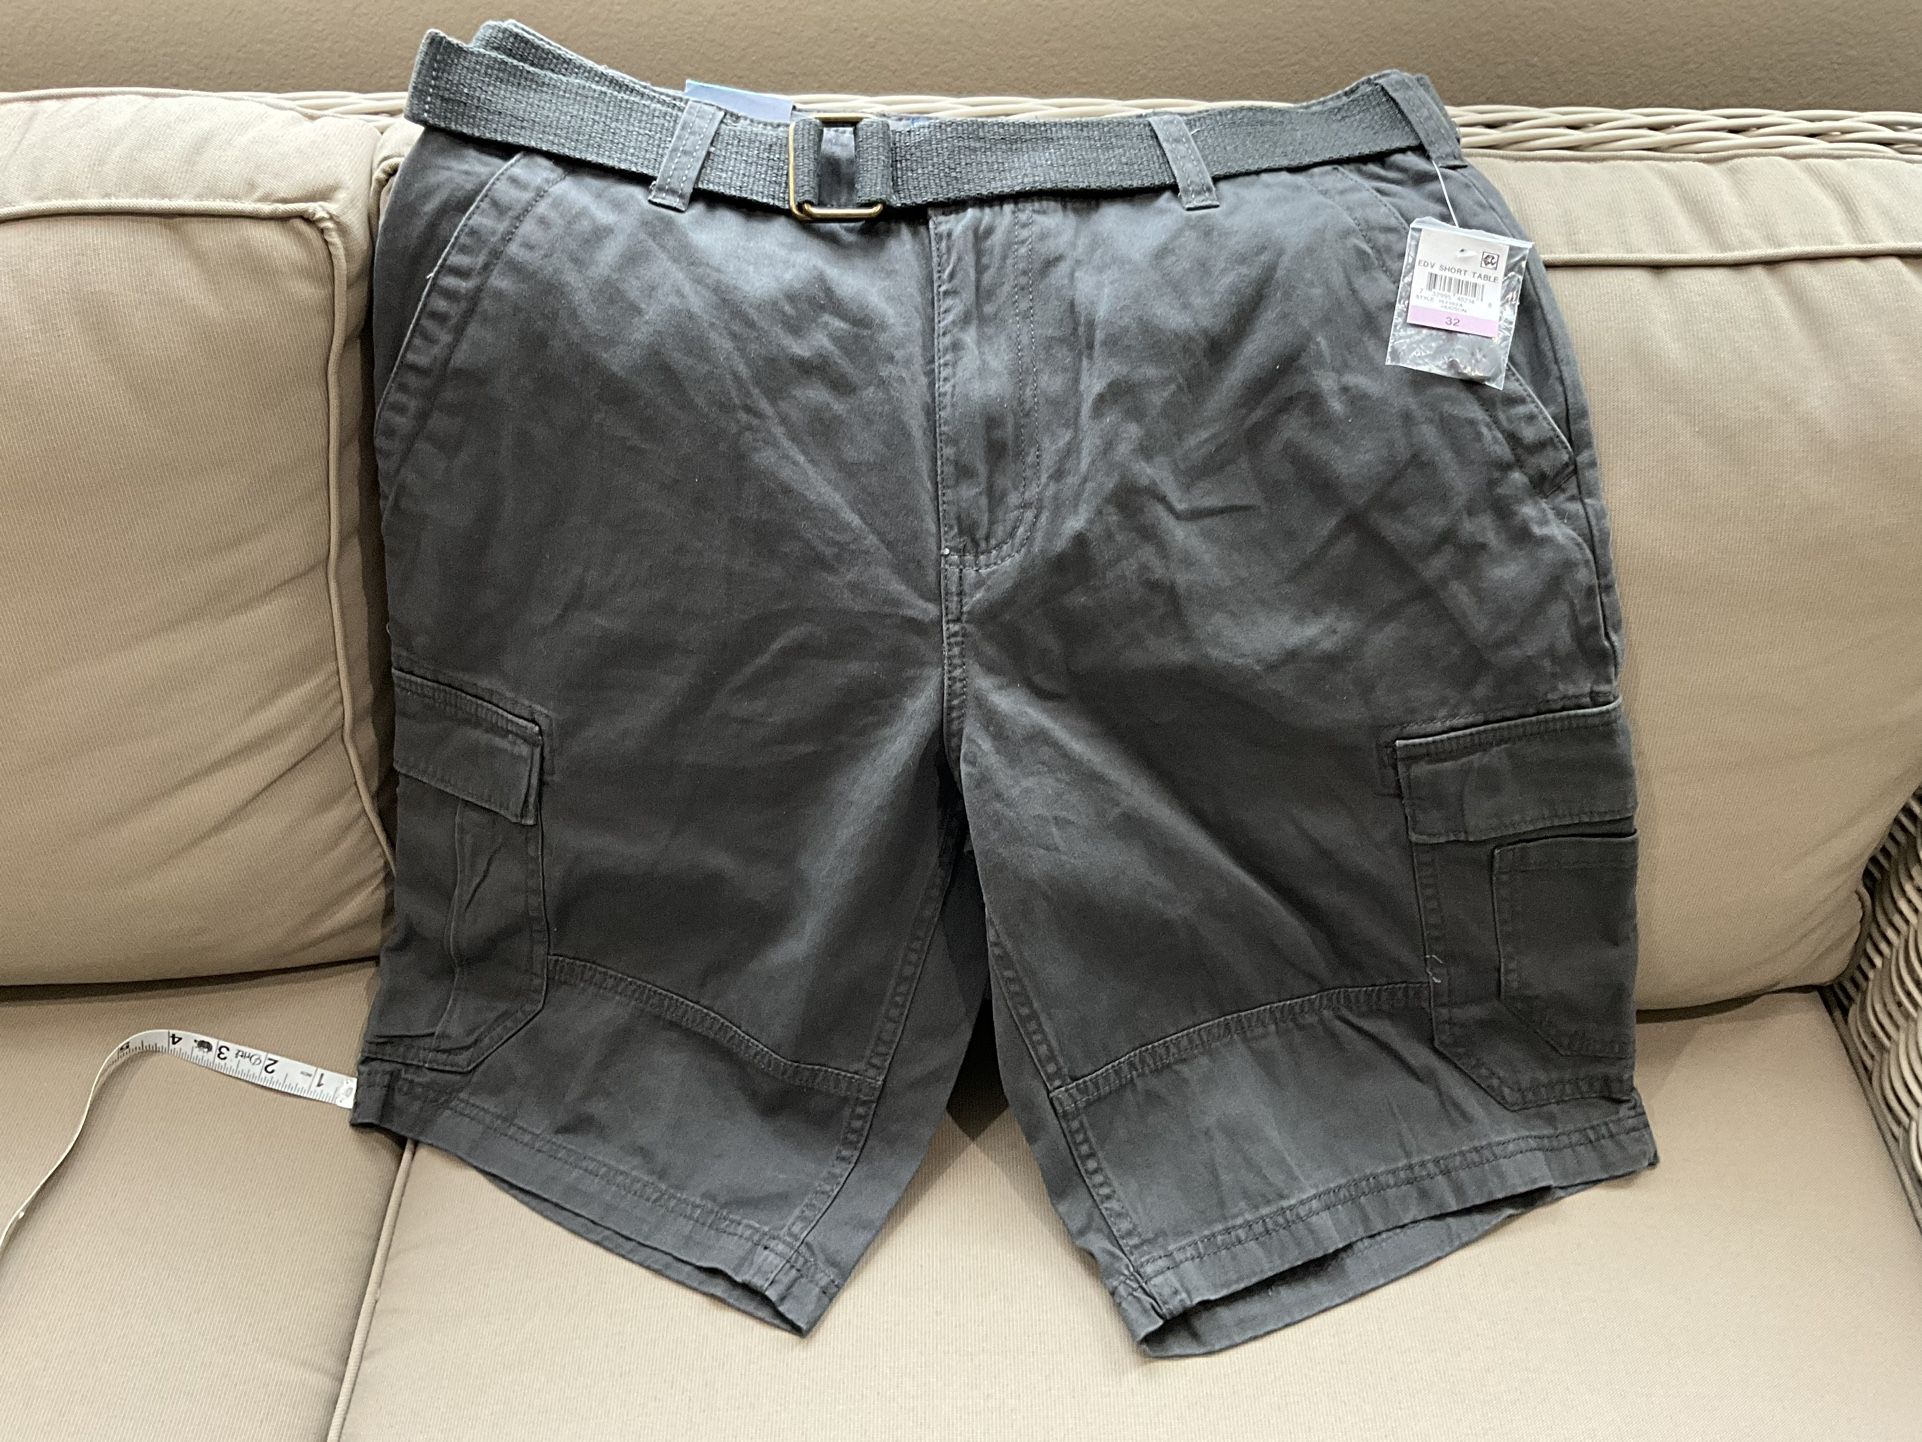 American Rags Men’s Shorts Size 32 